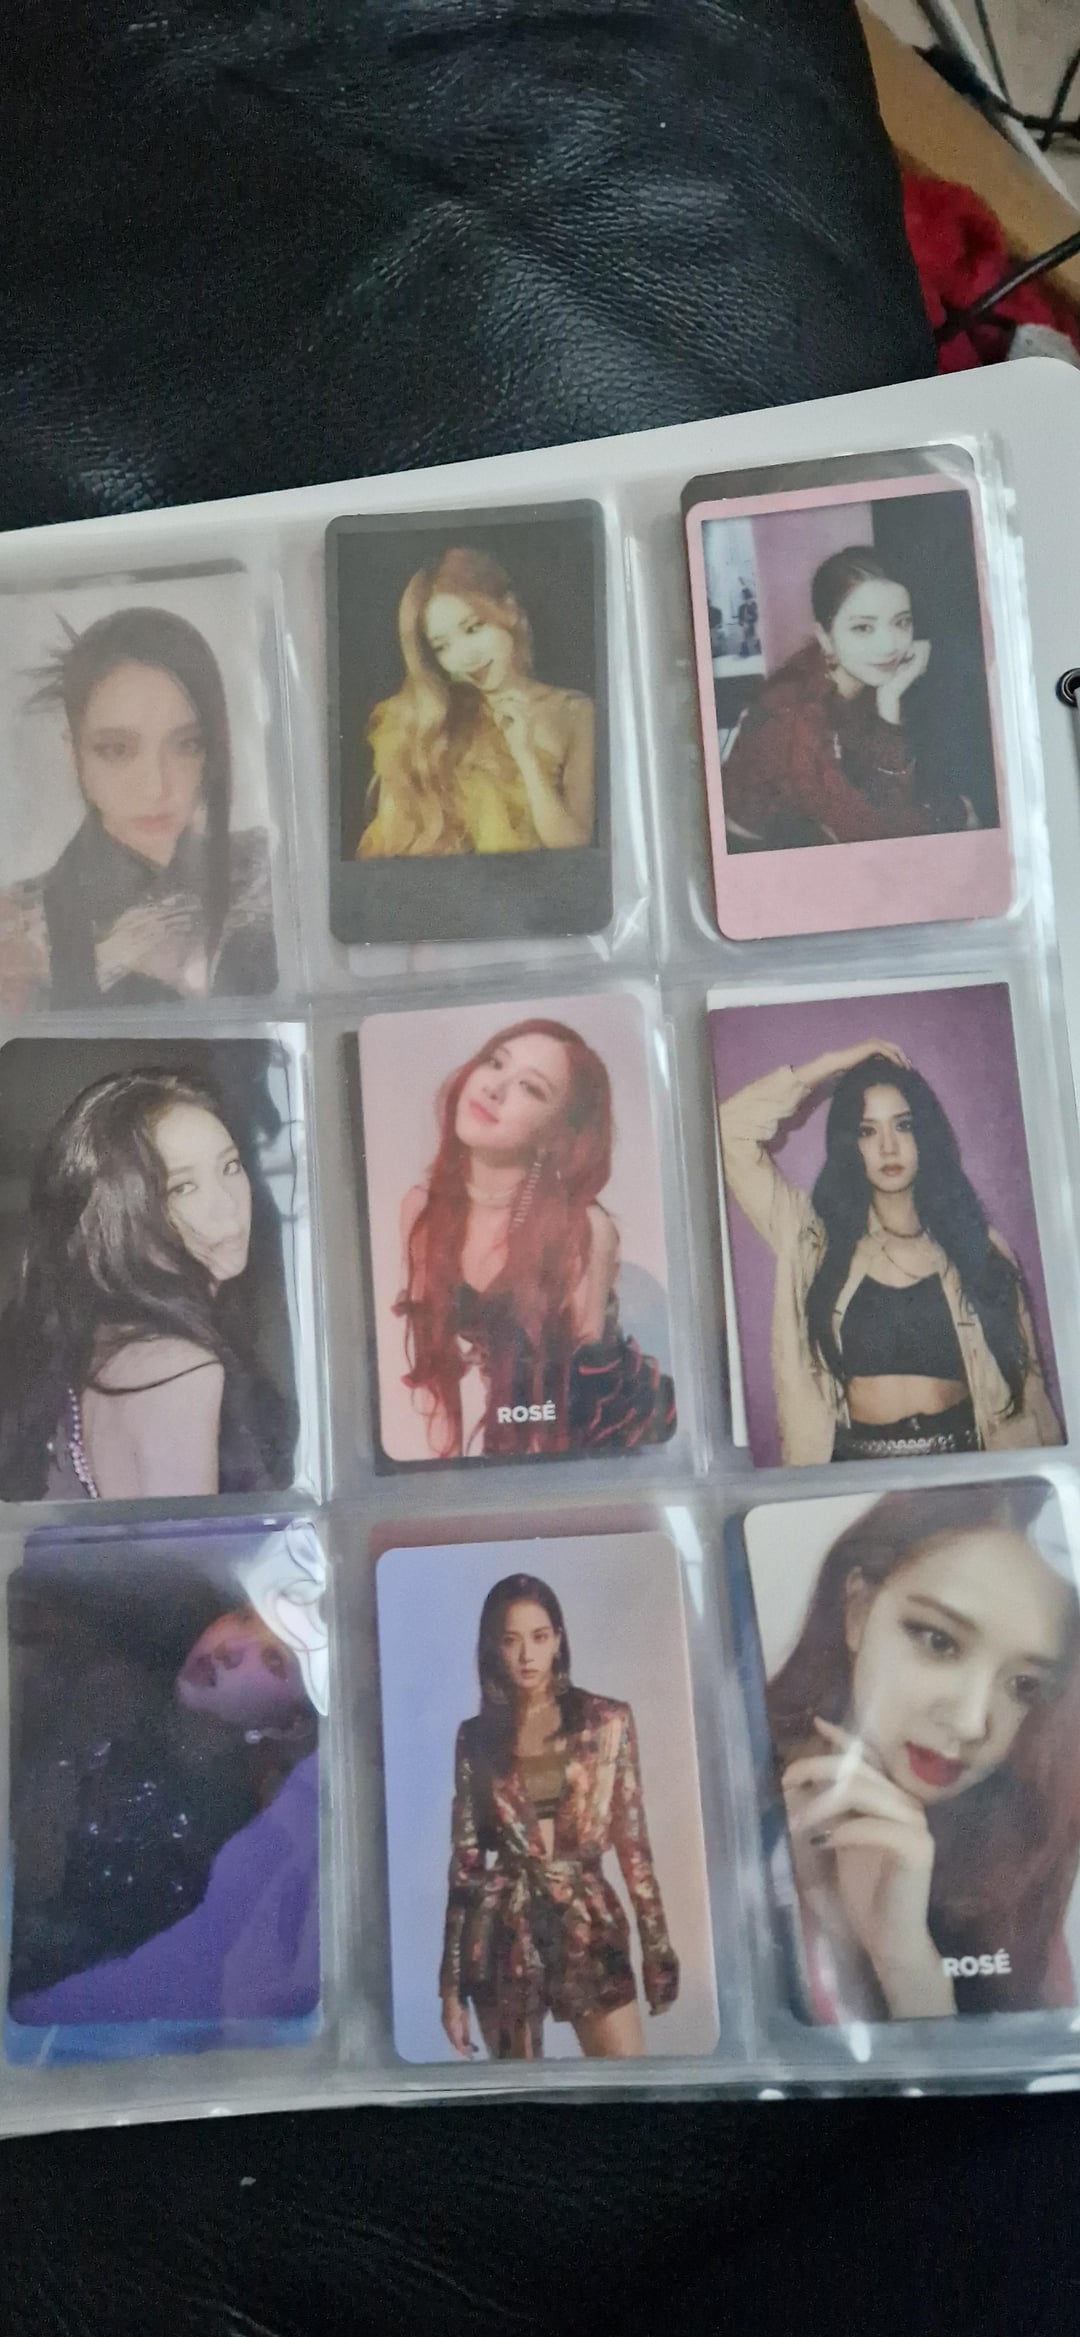 I'm sorting out my cards, and sleeping them are there any fakes (not part from any albums, or limited or member version.)